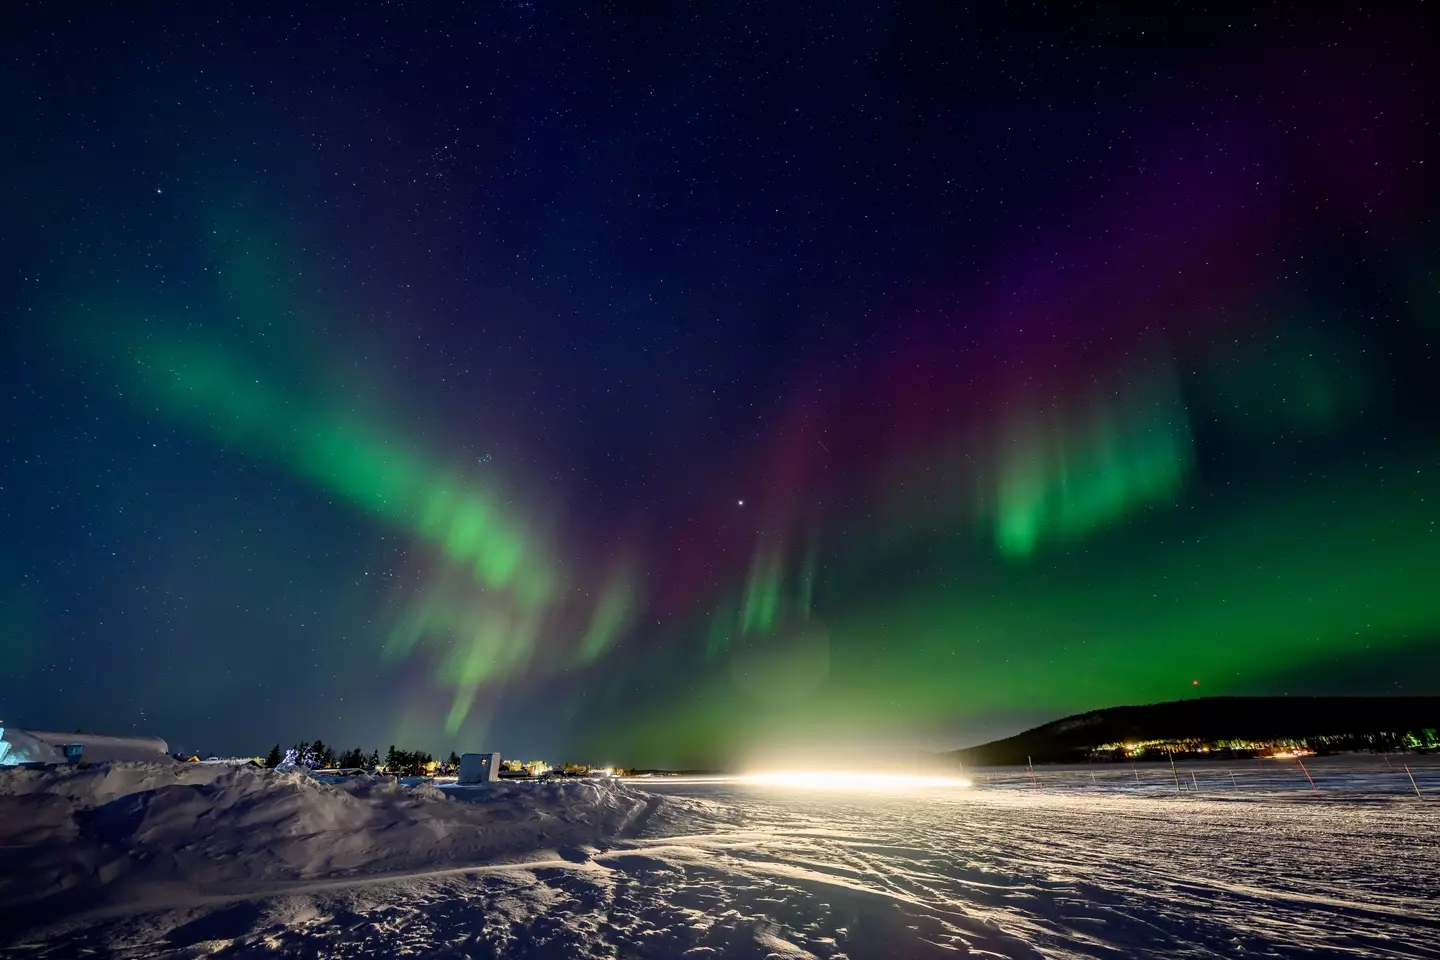 The northern lights could seen across the US tonight.